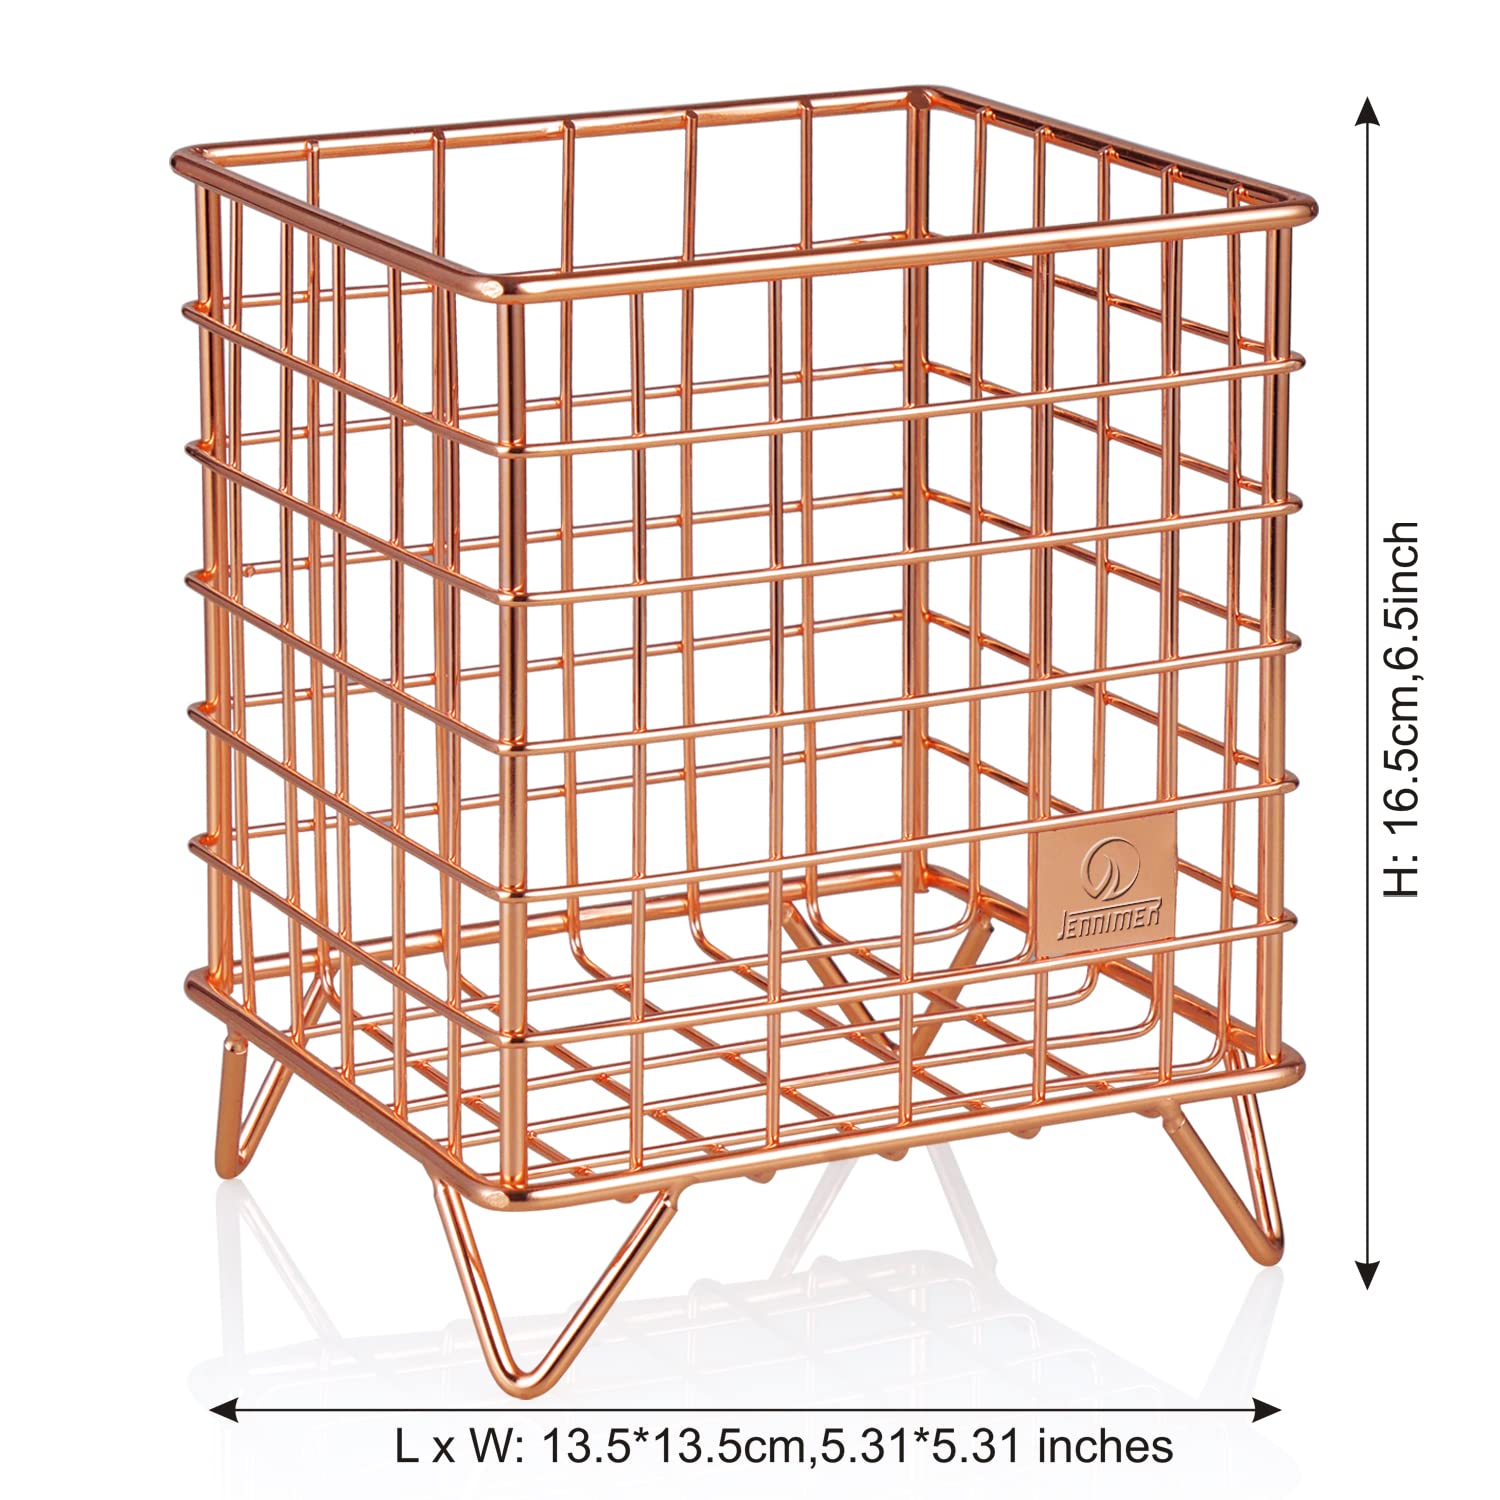 JENNIMER Coffee Pod Basket, K Cup Coffee Pod Holder,Coffee Capsule Cages, Kitchen Counter Storage Baskets (Rose Gold)